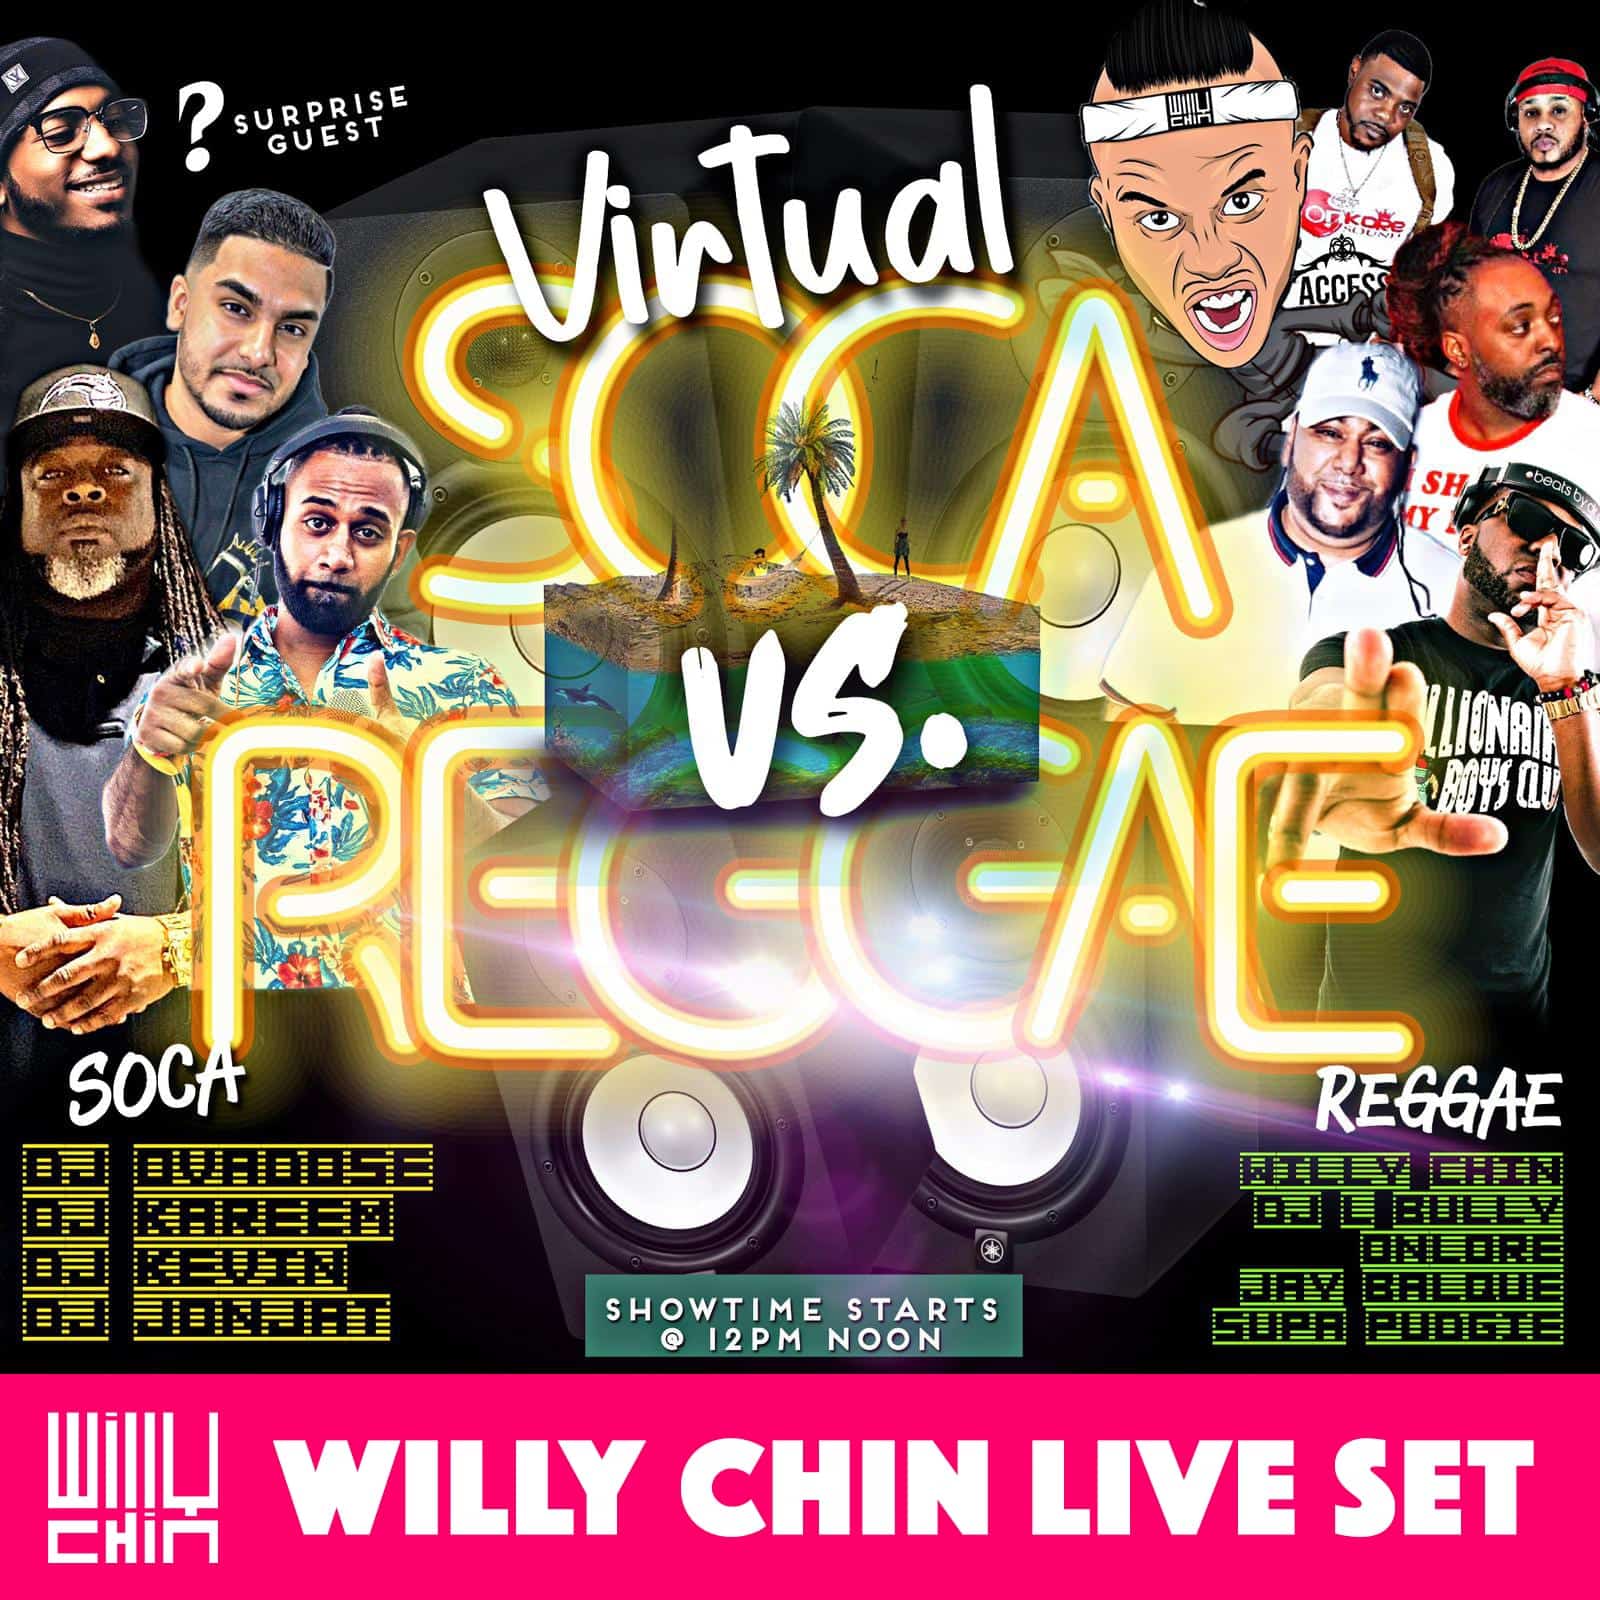 WILLY CHIN Live Set for VSVR